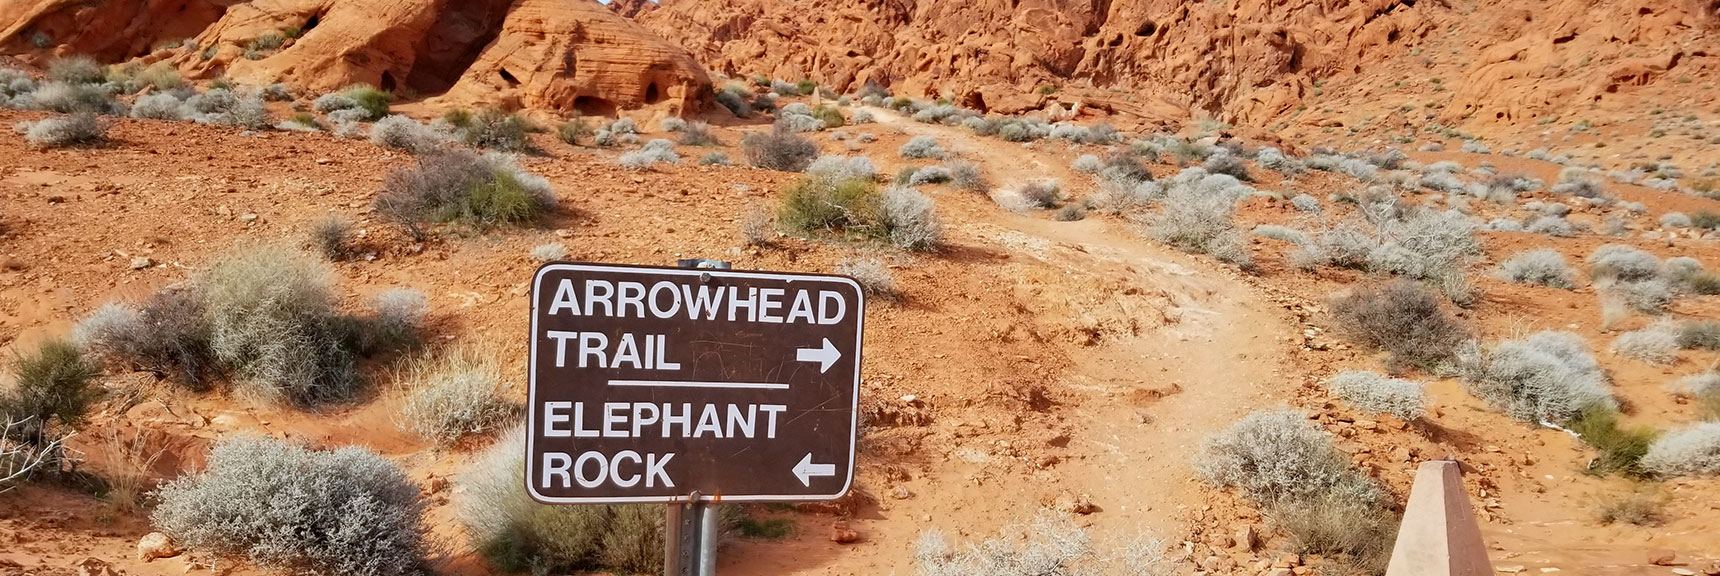 East Entrance to Elephant Rock Loop in Valley of Fire State Park, Nevada Slide